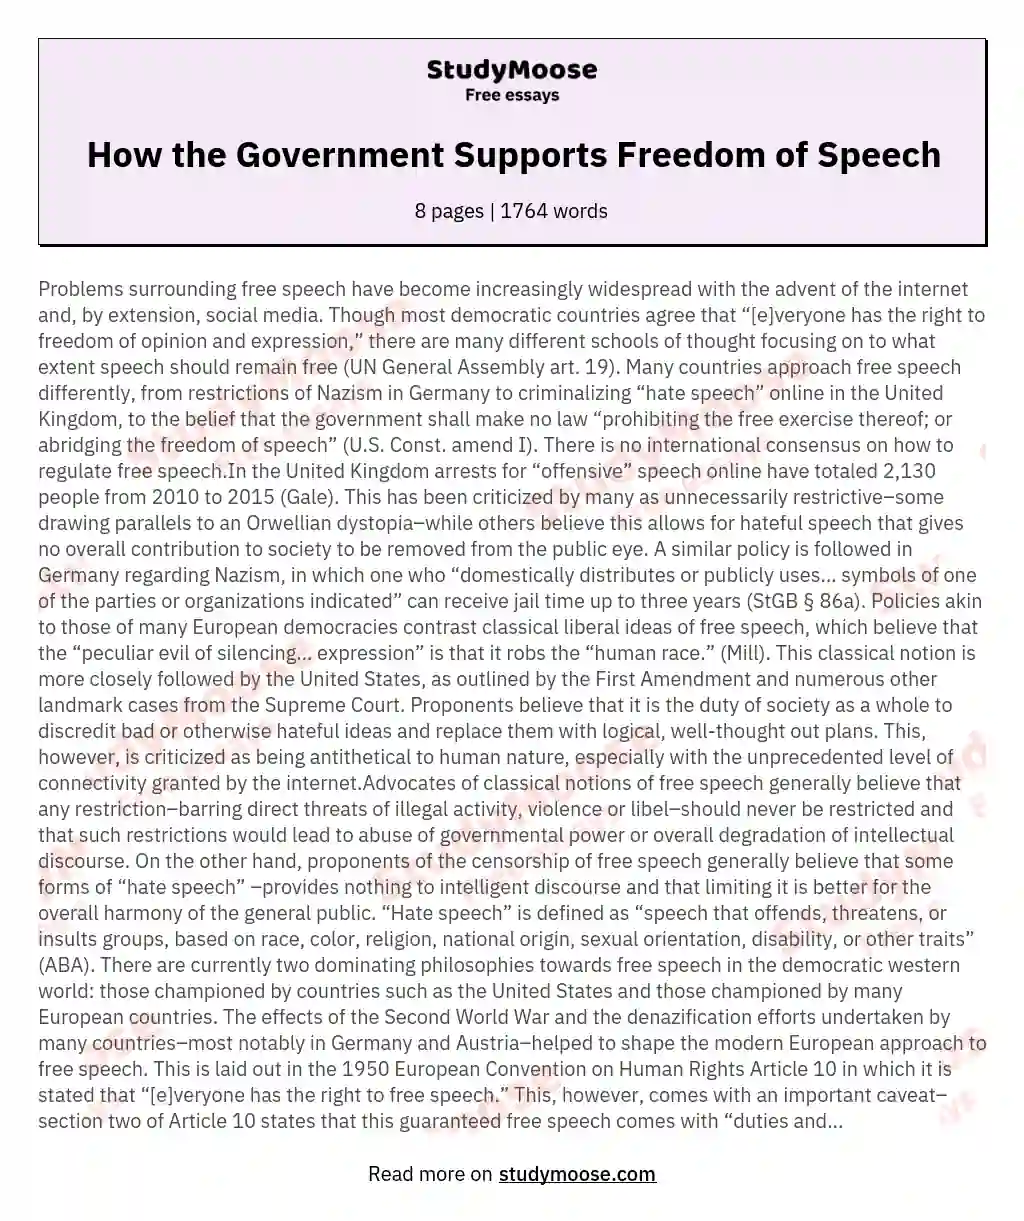 How the Government Supports Freedom of Speech essay